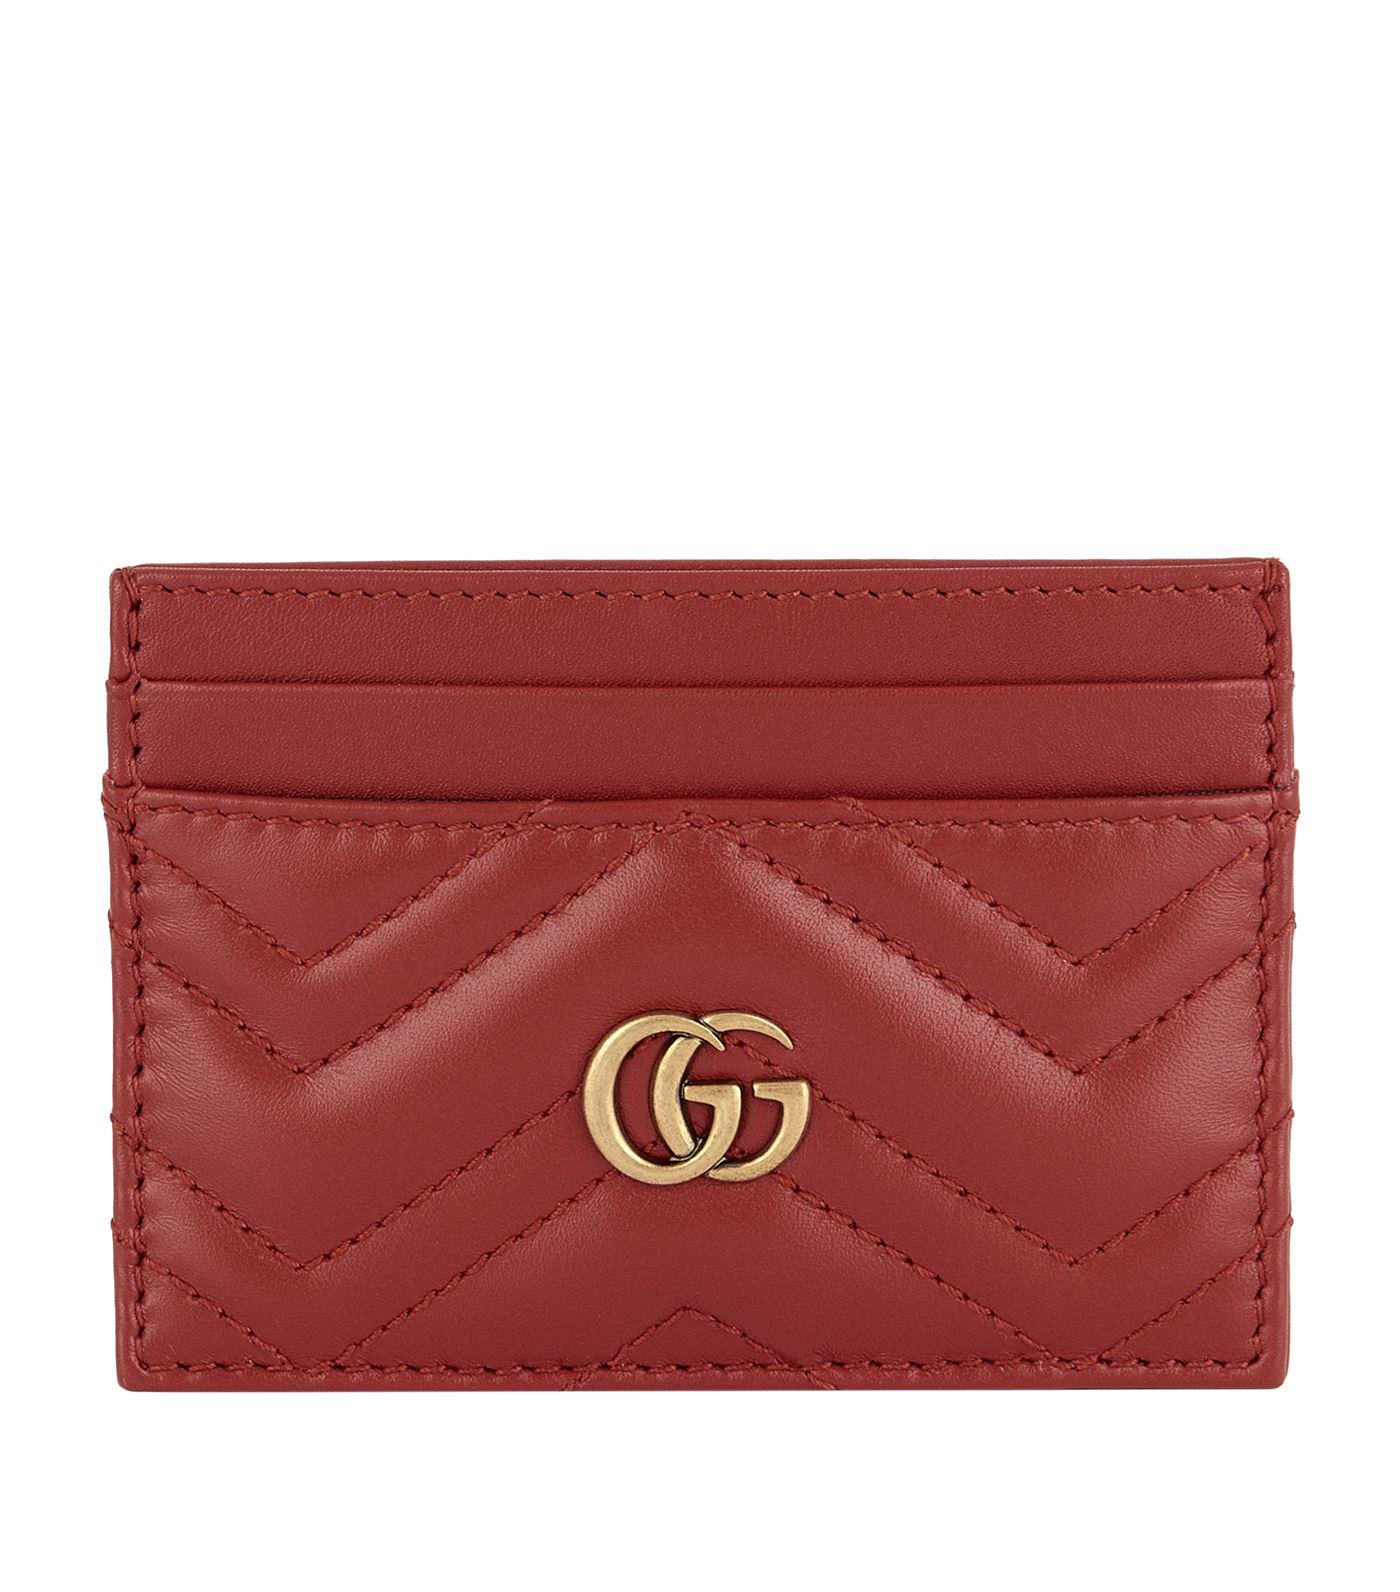 Lyst - Gucci Quilted Marmont Card Holder in Red